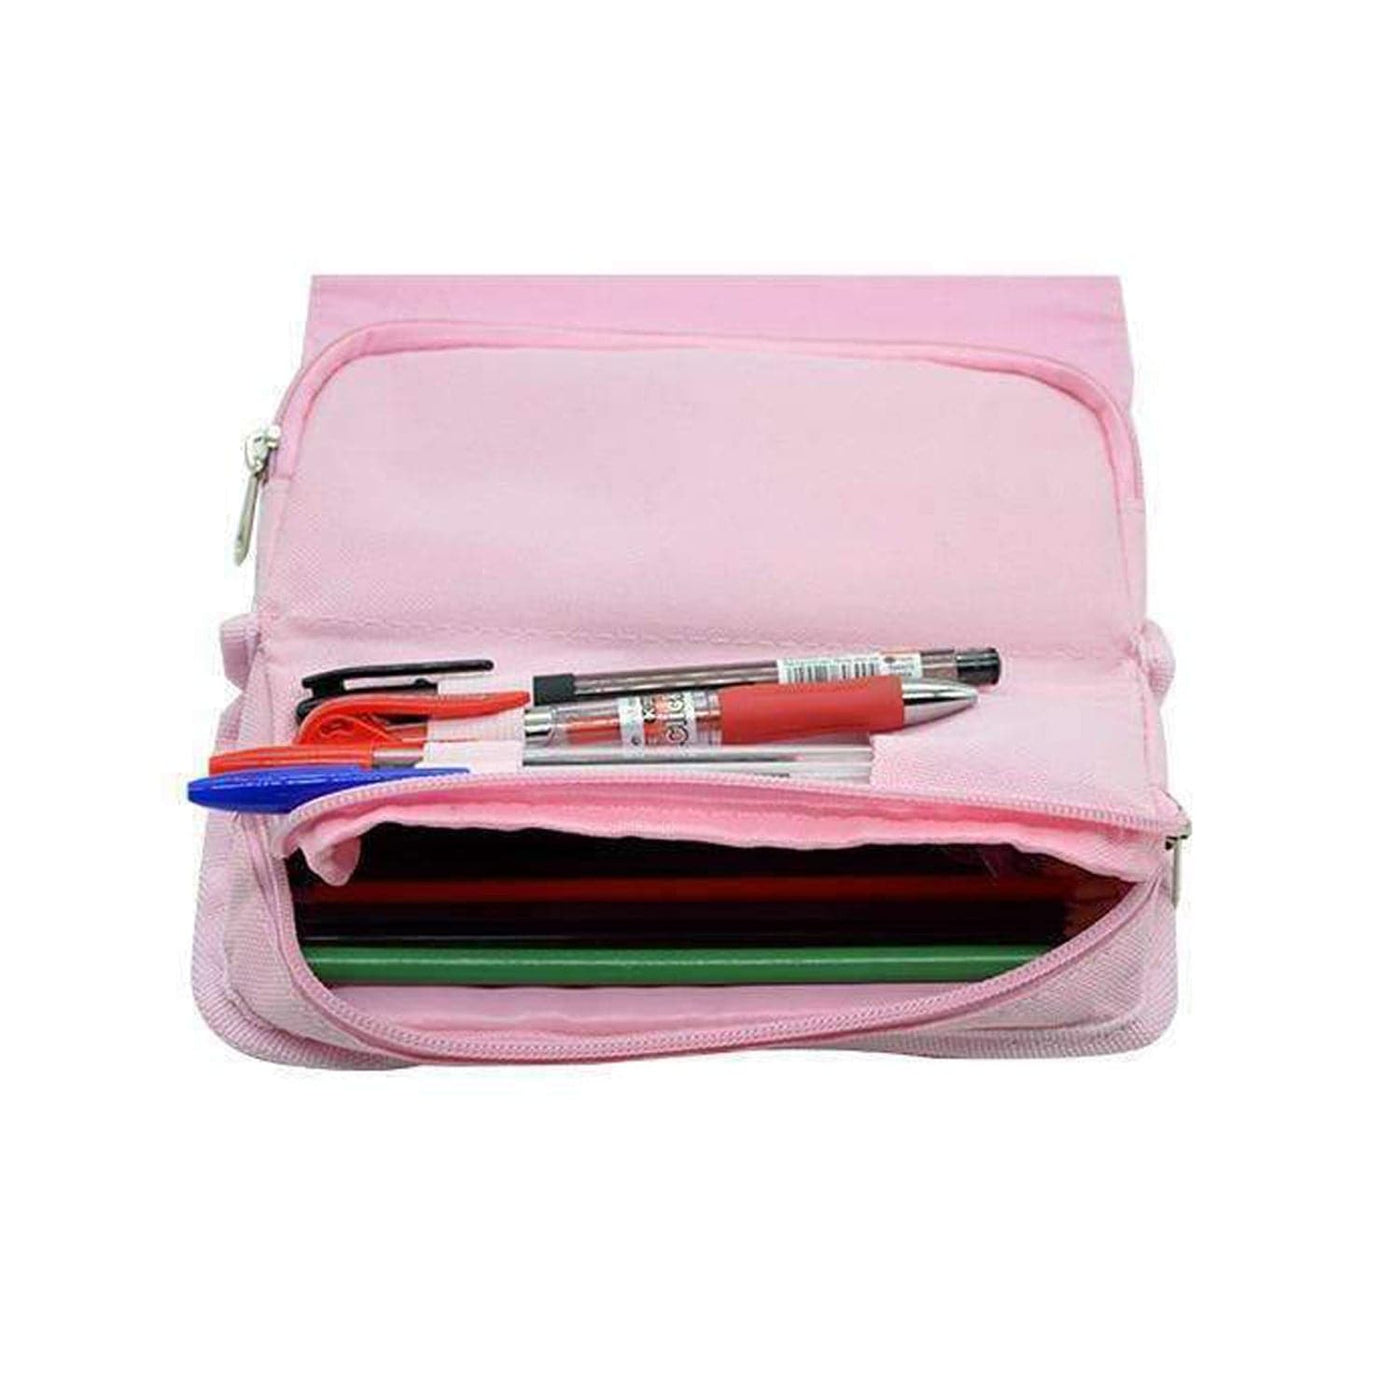 Orange And Pink Checked - Floral Patterns Pencil Case